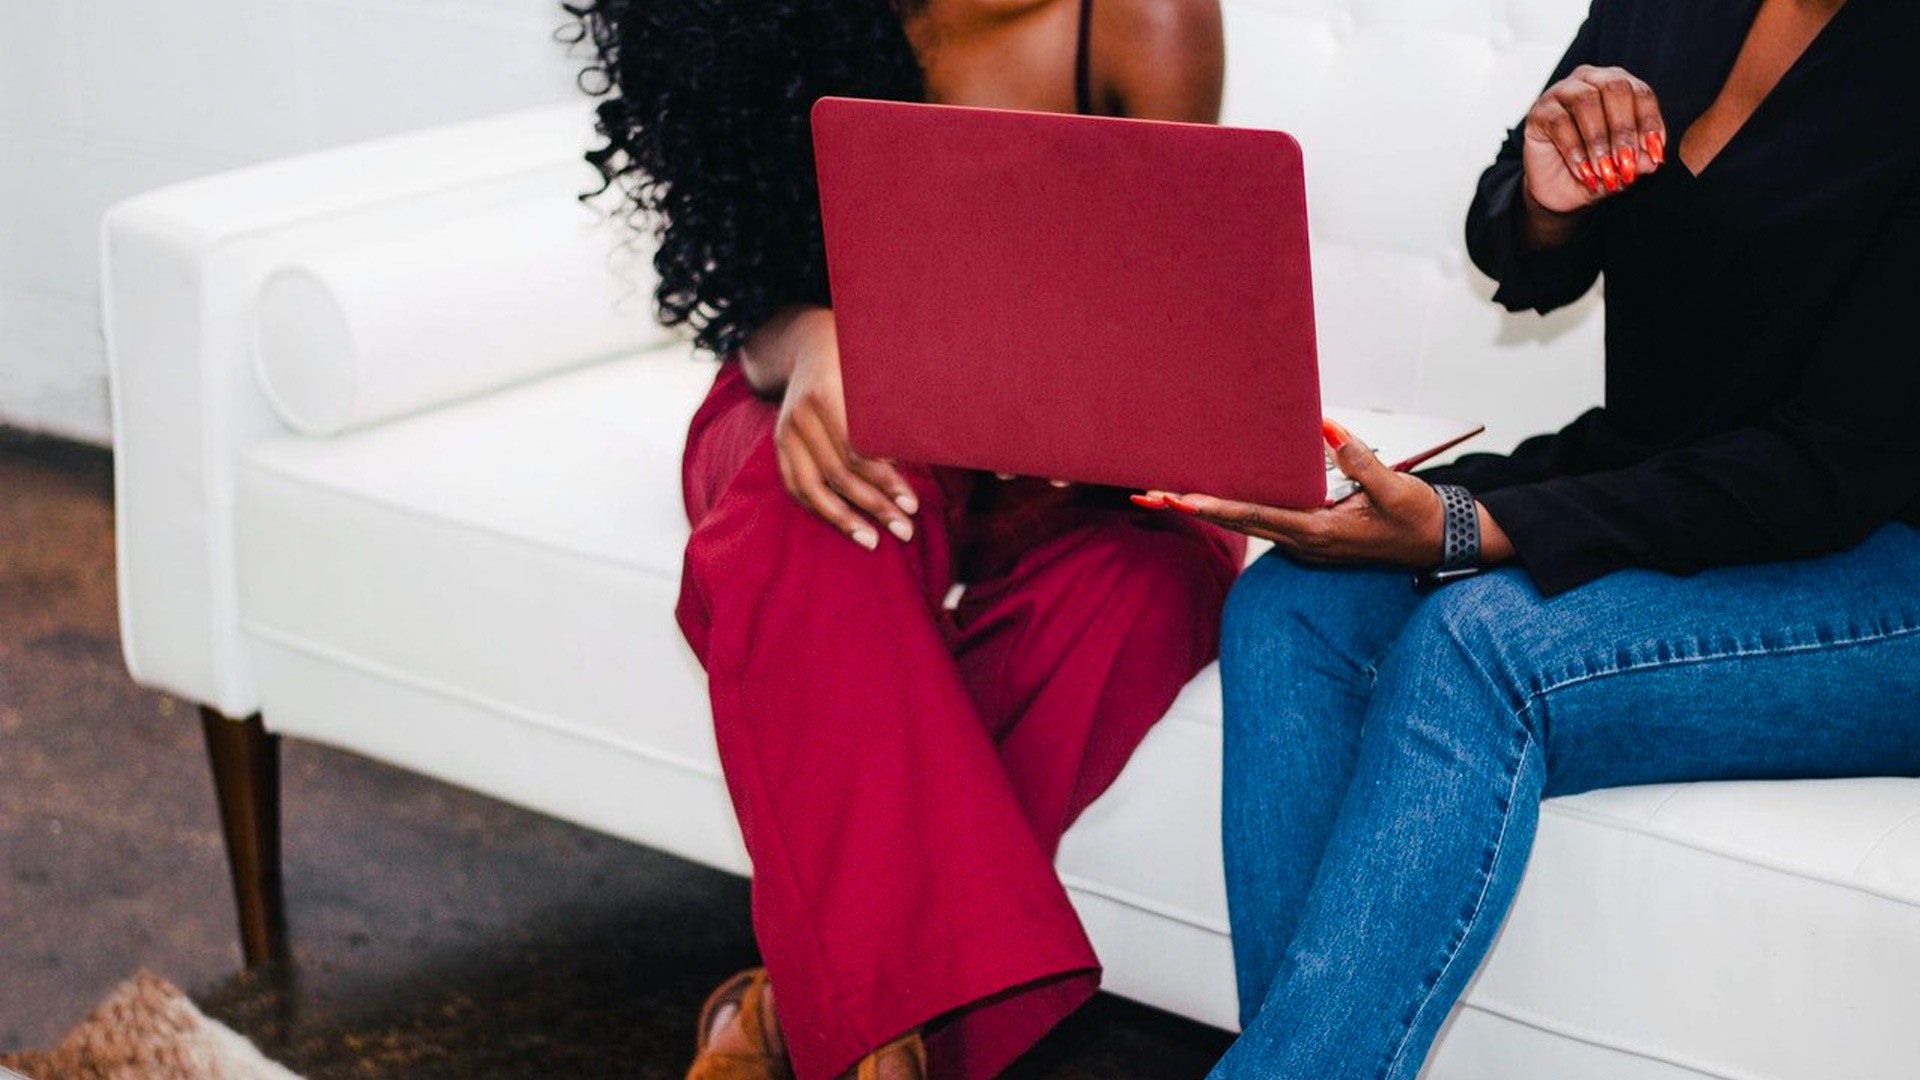 Two women of color looking at a laptop together